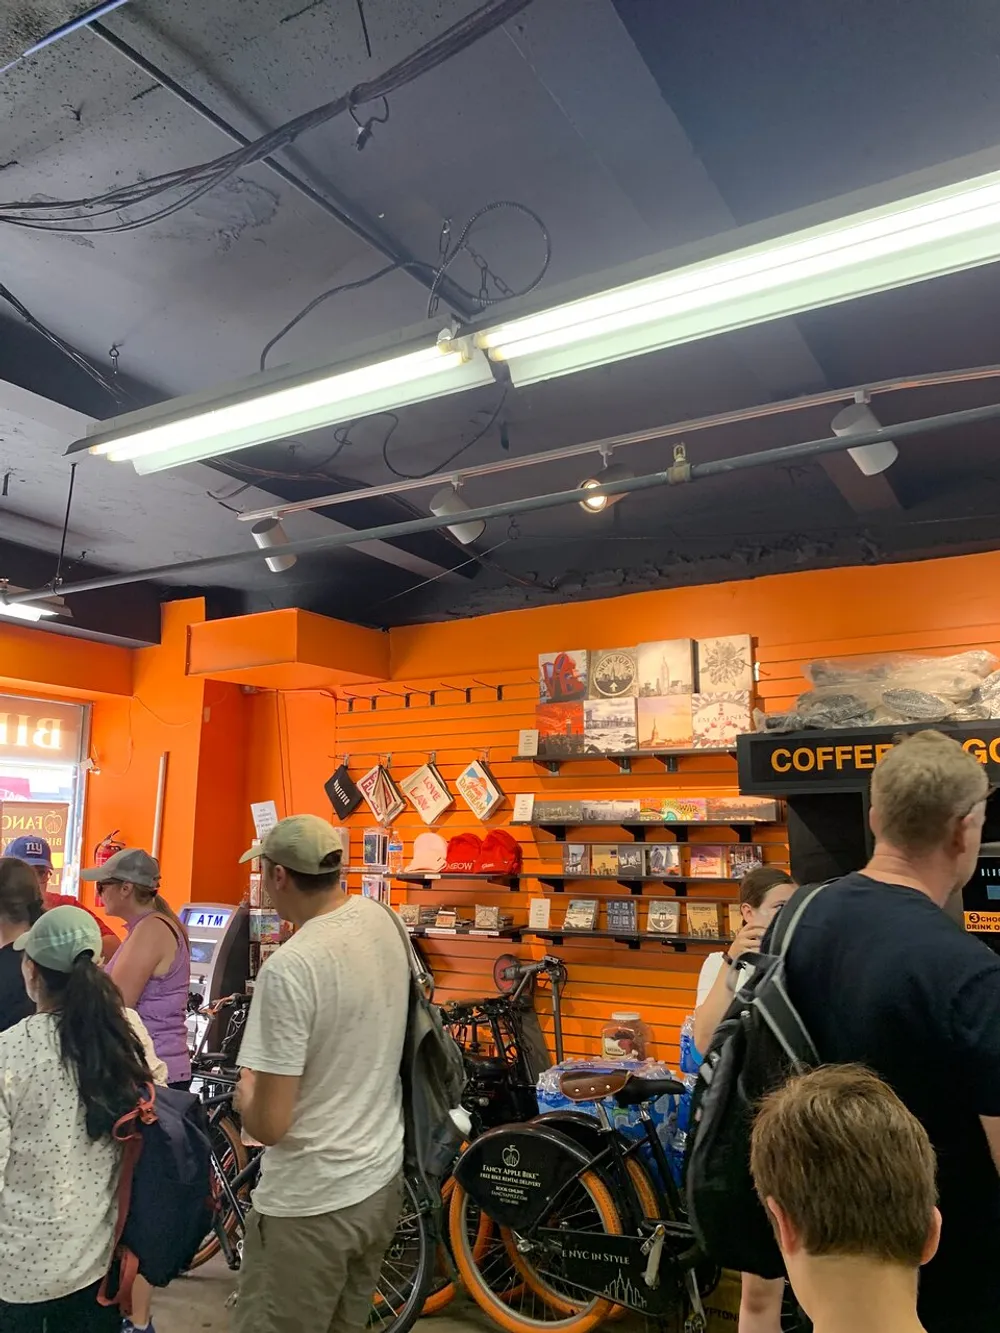 The image shows a group of people inside a store with orange shelves carrying various merchandise and bicycles indicating it might be a bike rental or gear shop